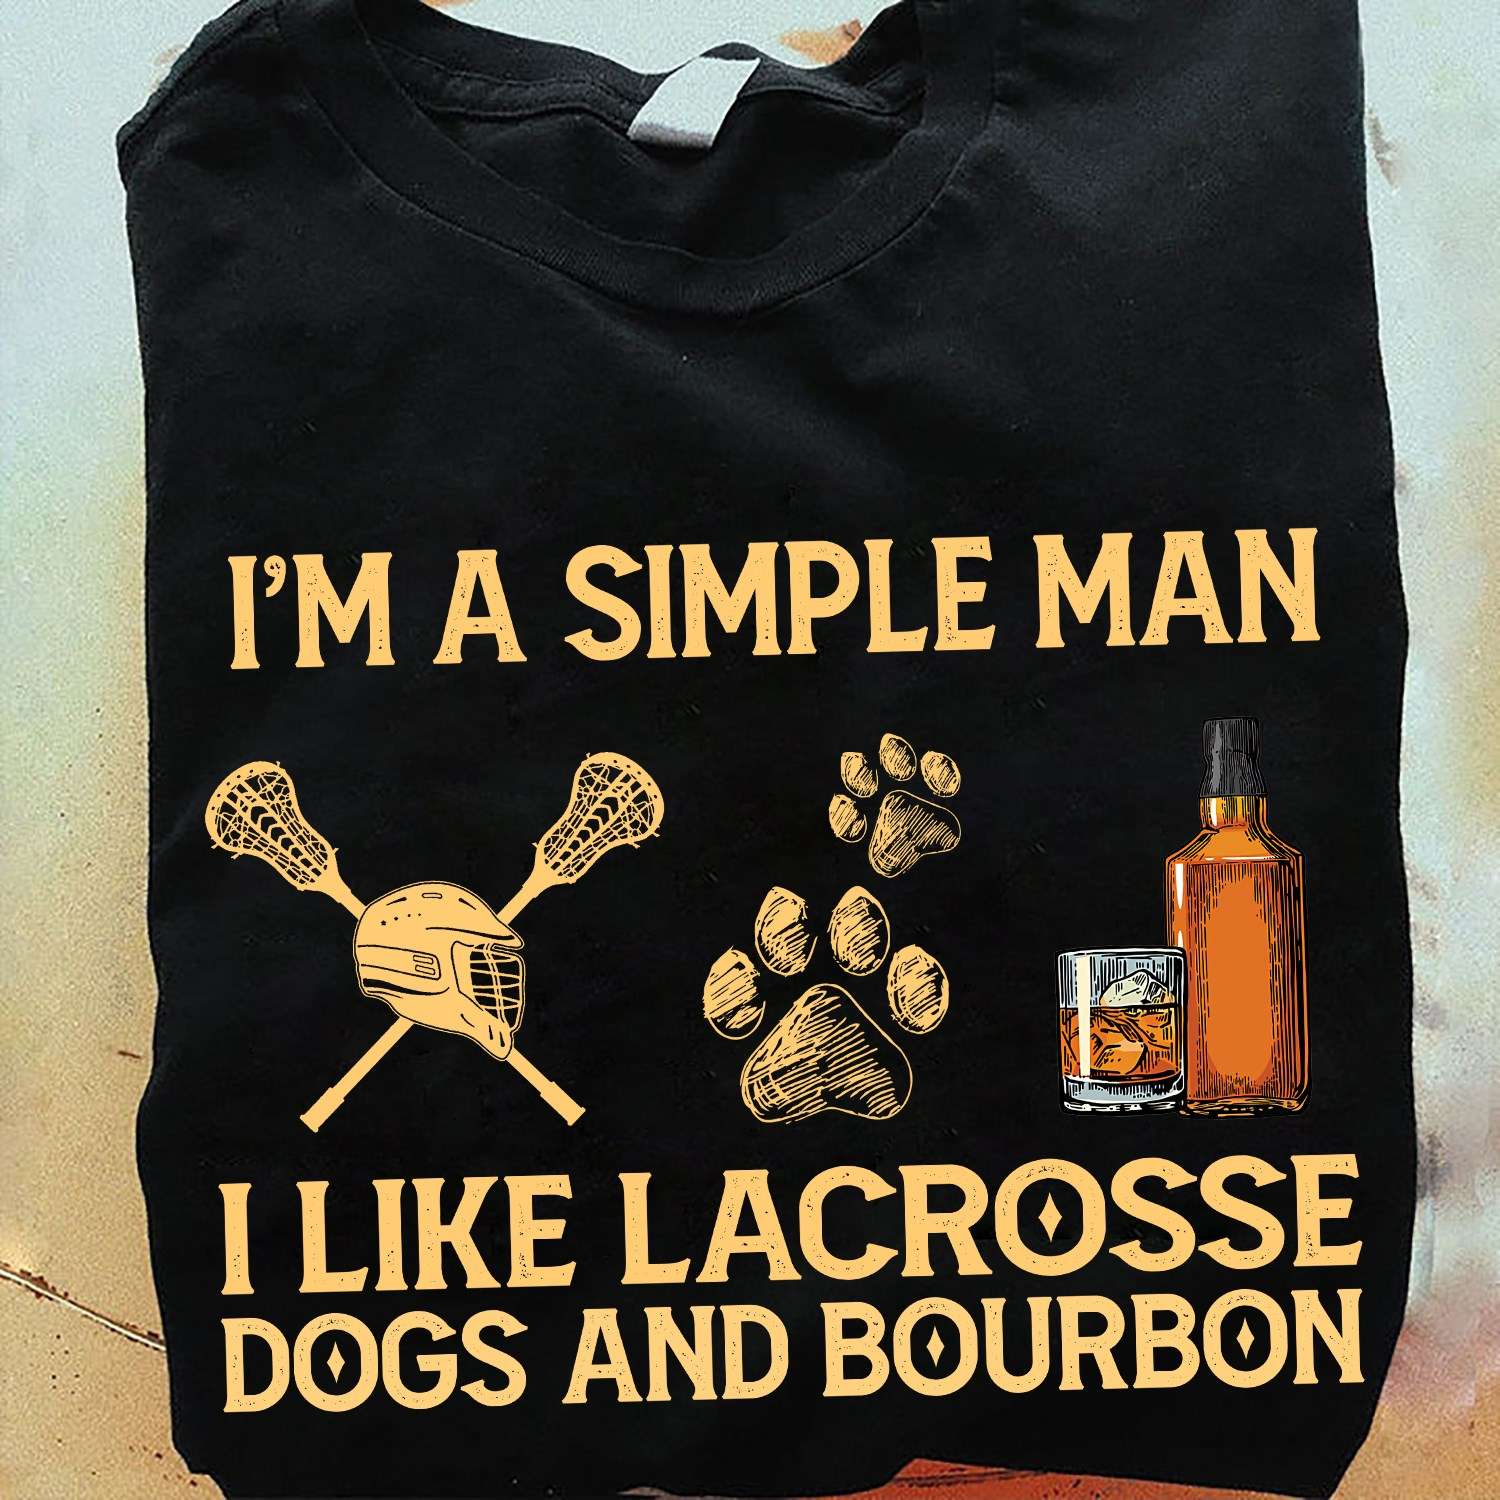 Lacrosse Dogs And Bourbon - I'm a simple man i like lacrosse dogs and bourbon